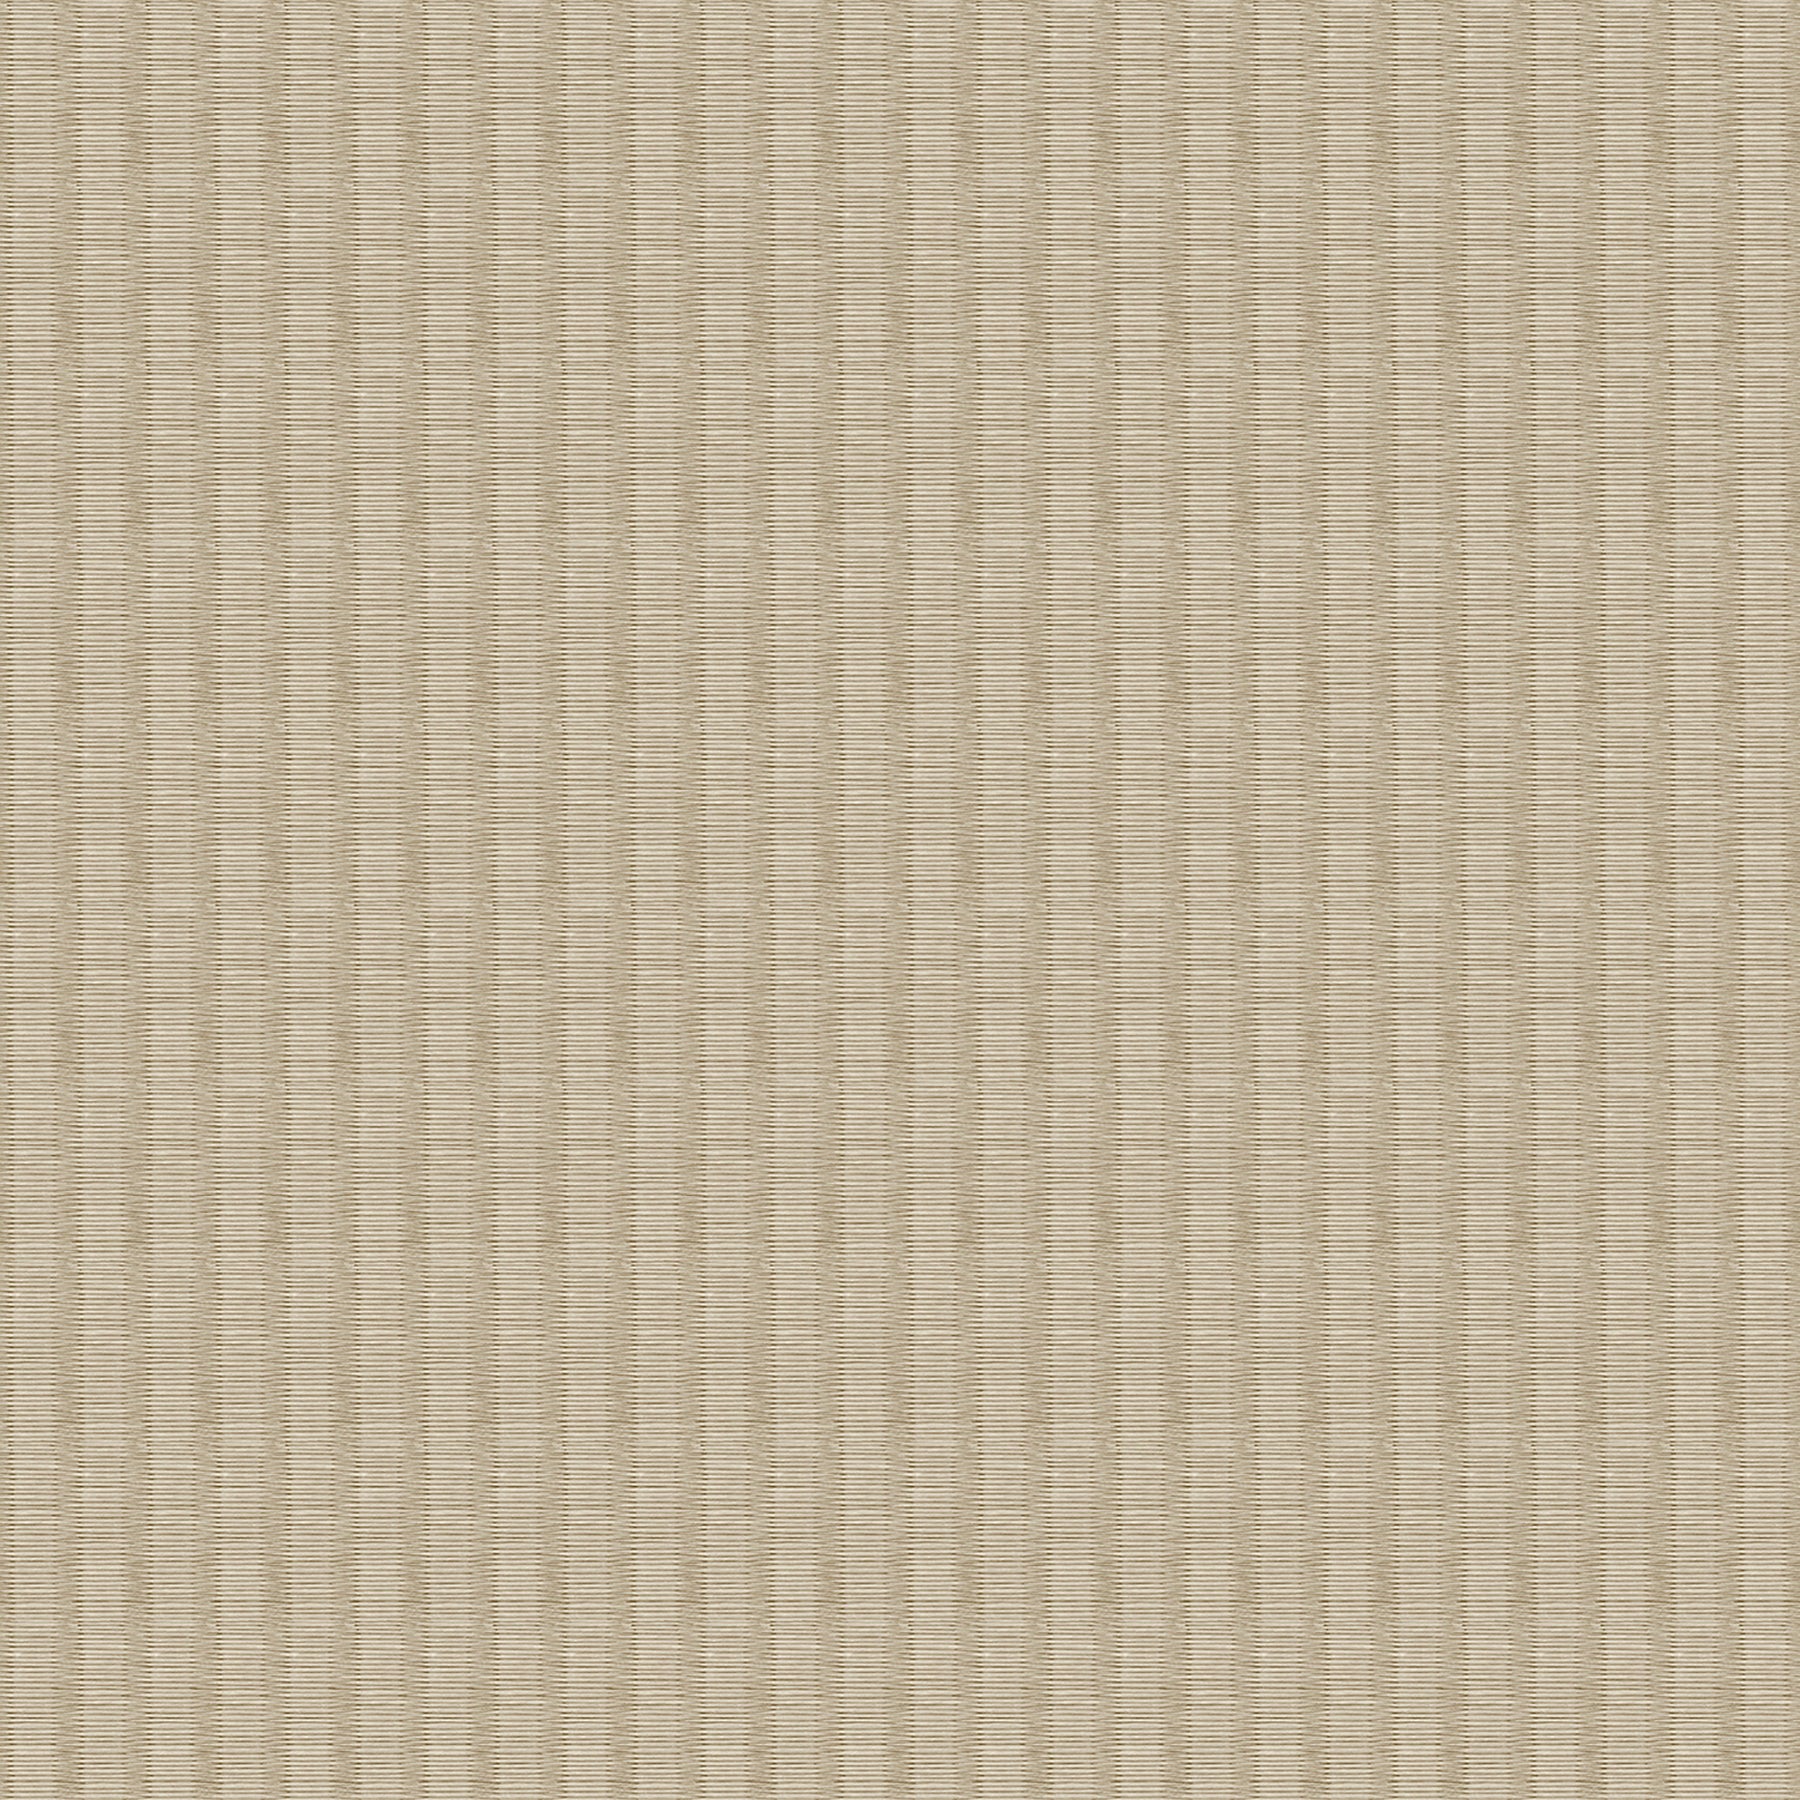 Purchase 4020-95307 Geo & Textures Owen Light Brown Ikat Stripes Light Brown by Advantage